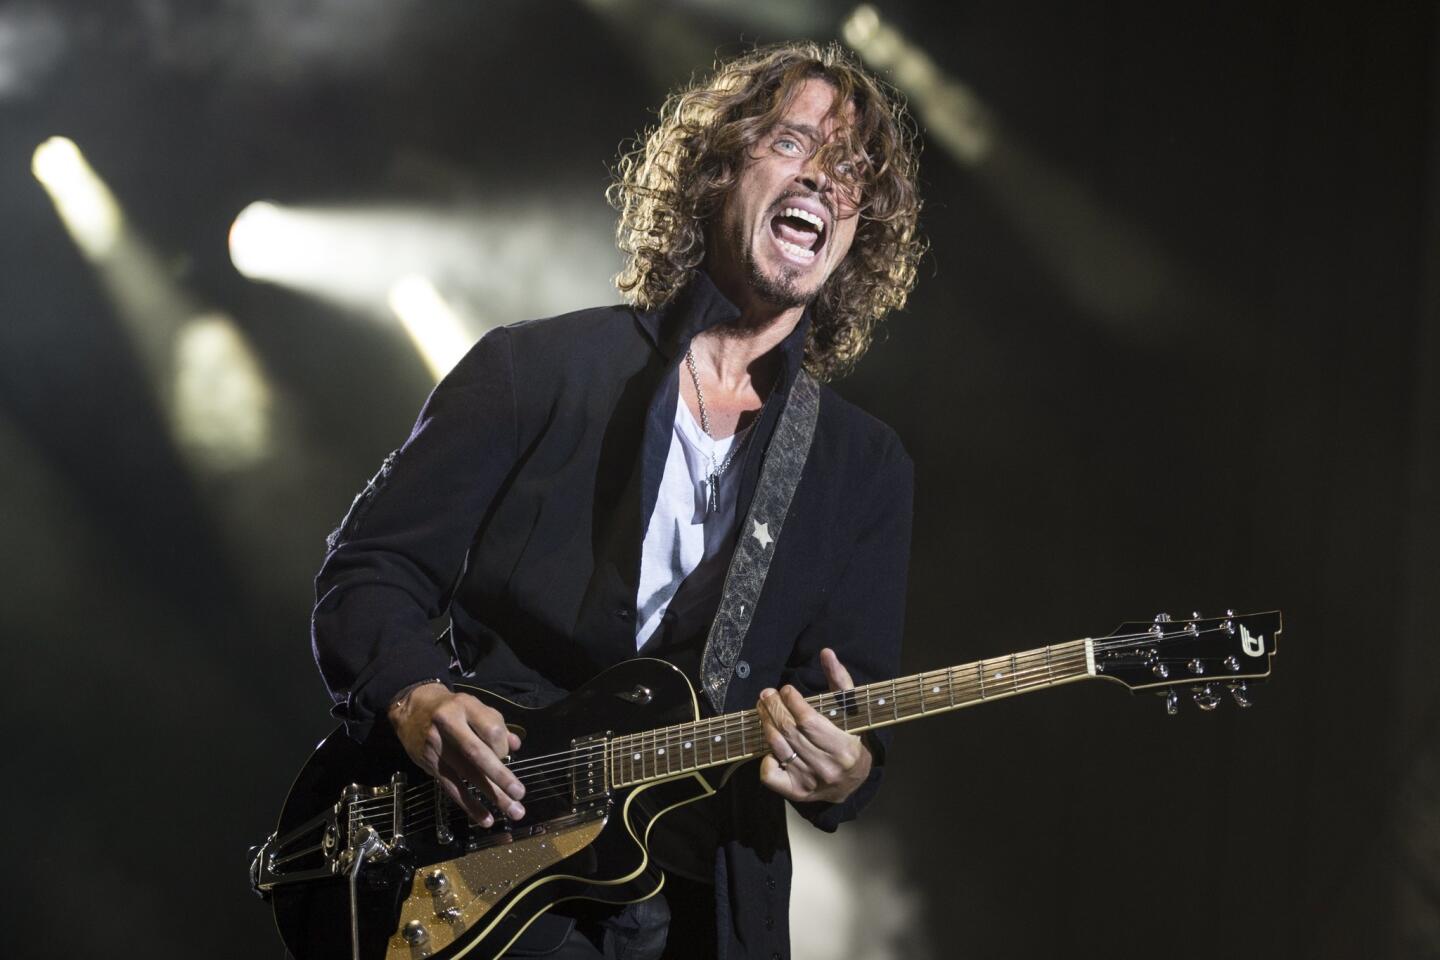 Singer Chris Cornell of Audioslave and Soundgarden died on May 18, 2017, while on tour in Detroit, at age 52. A medical examiner ruled the cause of his death as suicide. Read more.